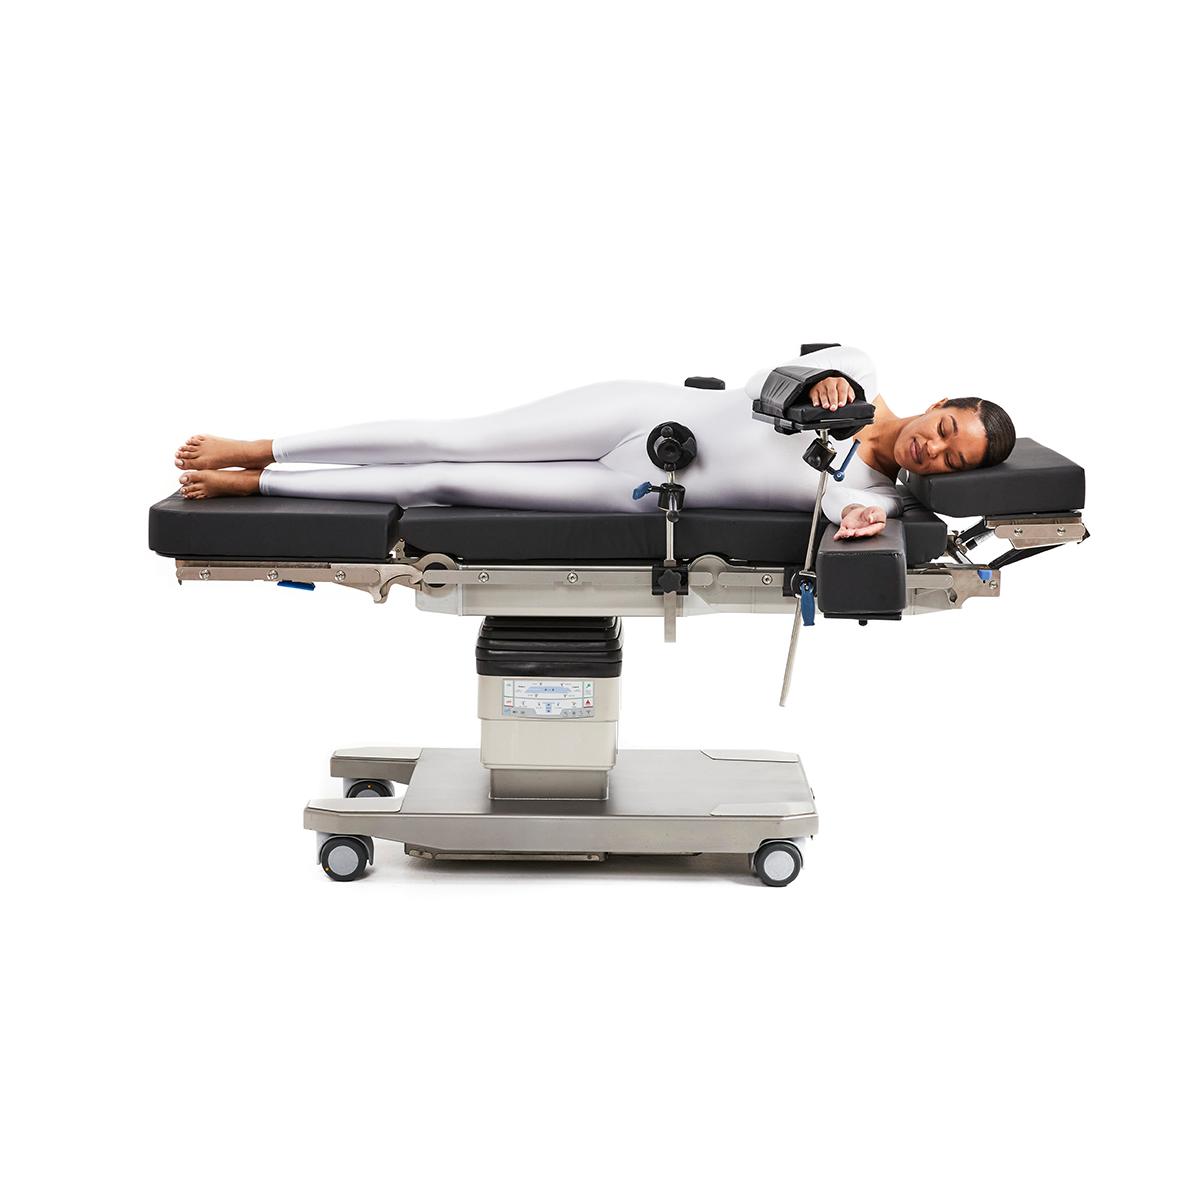 Patient positioned on Hillrom™ surgical table equipped with Lateral Positioning accessories. 